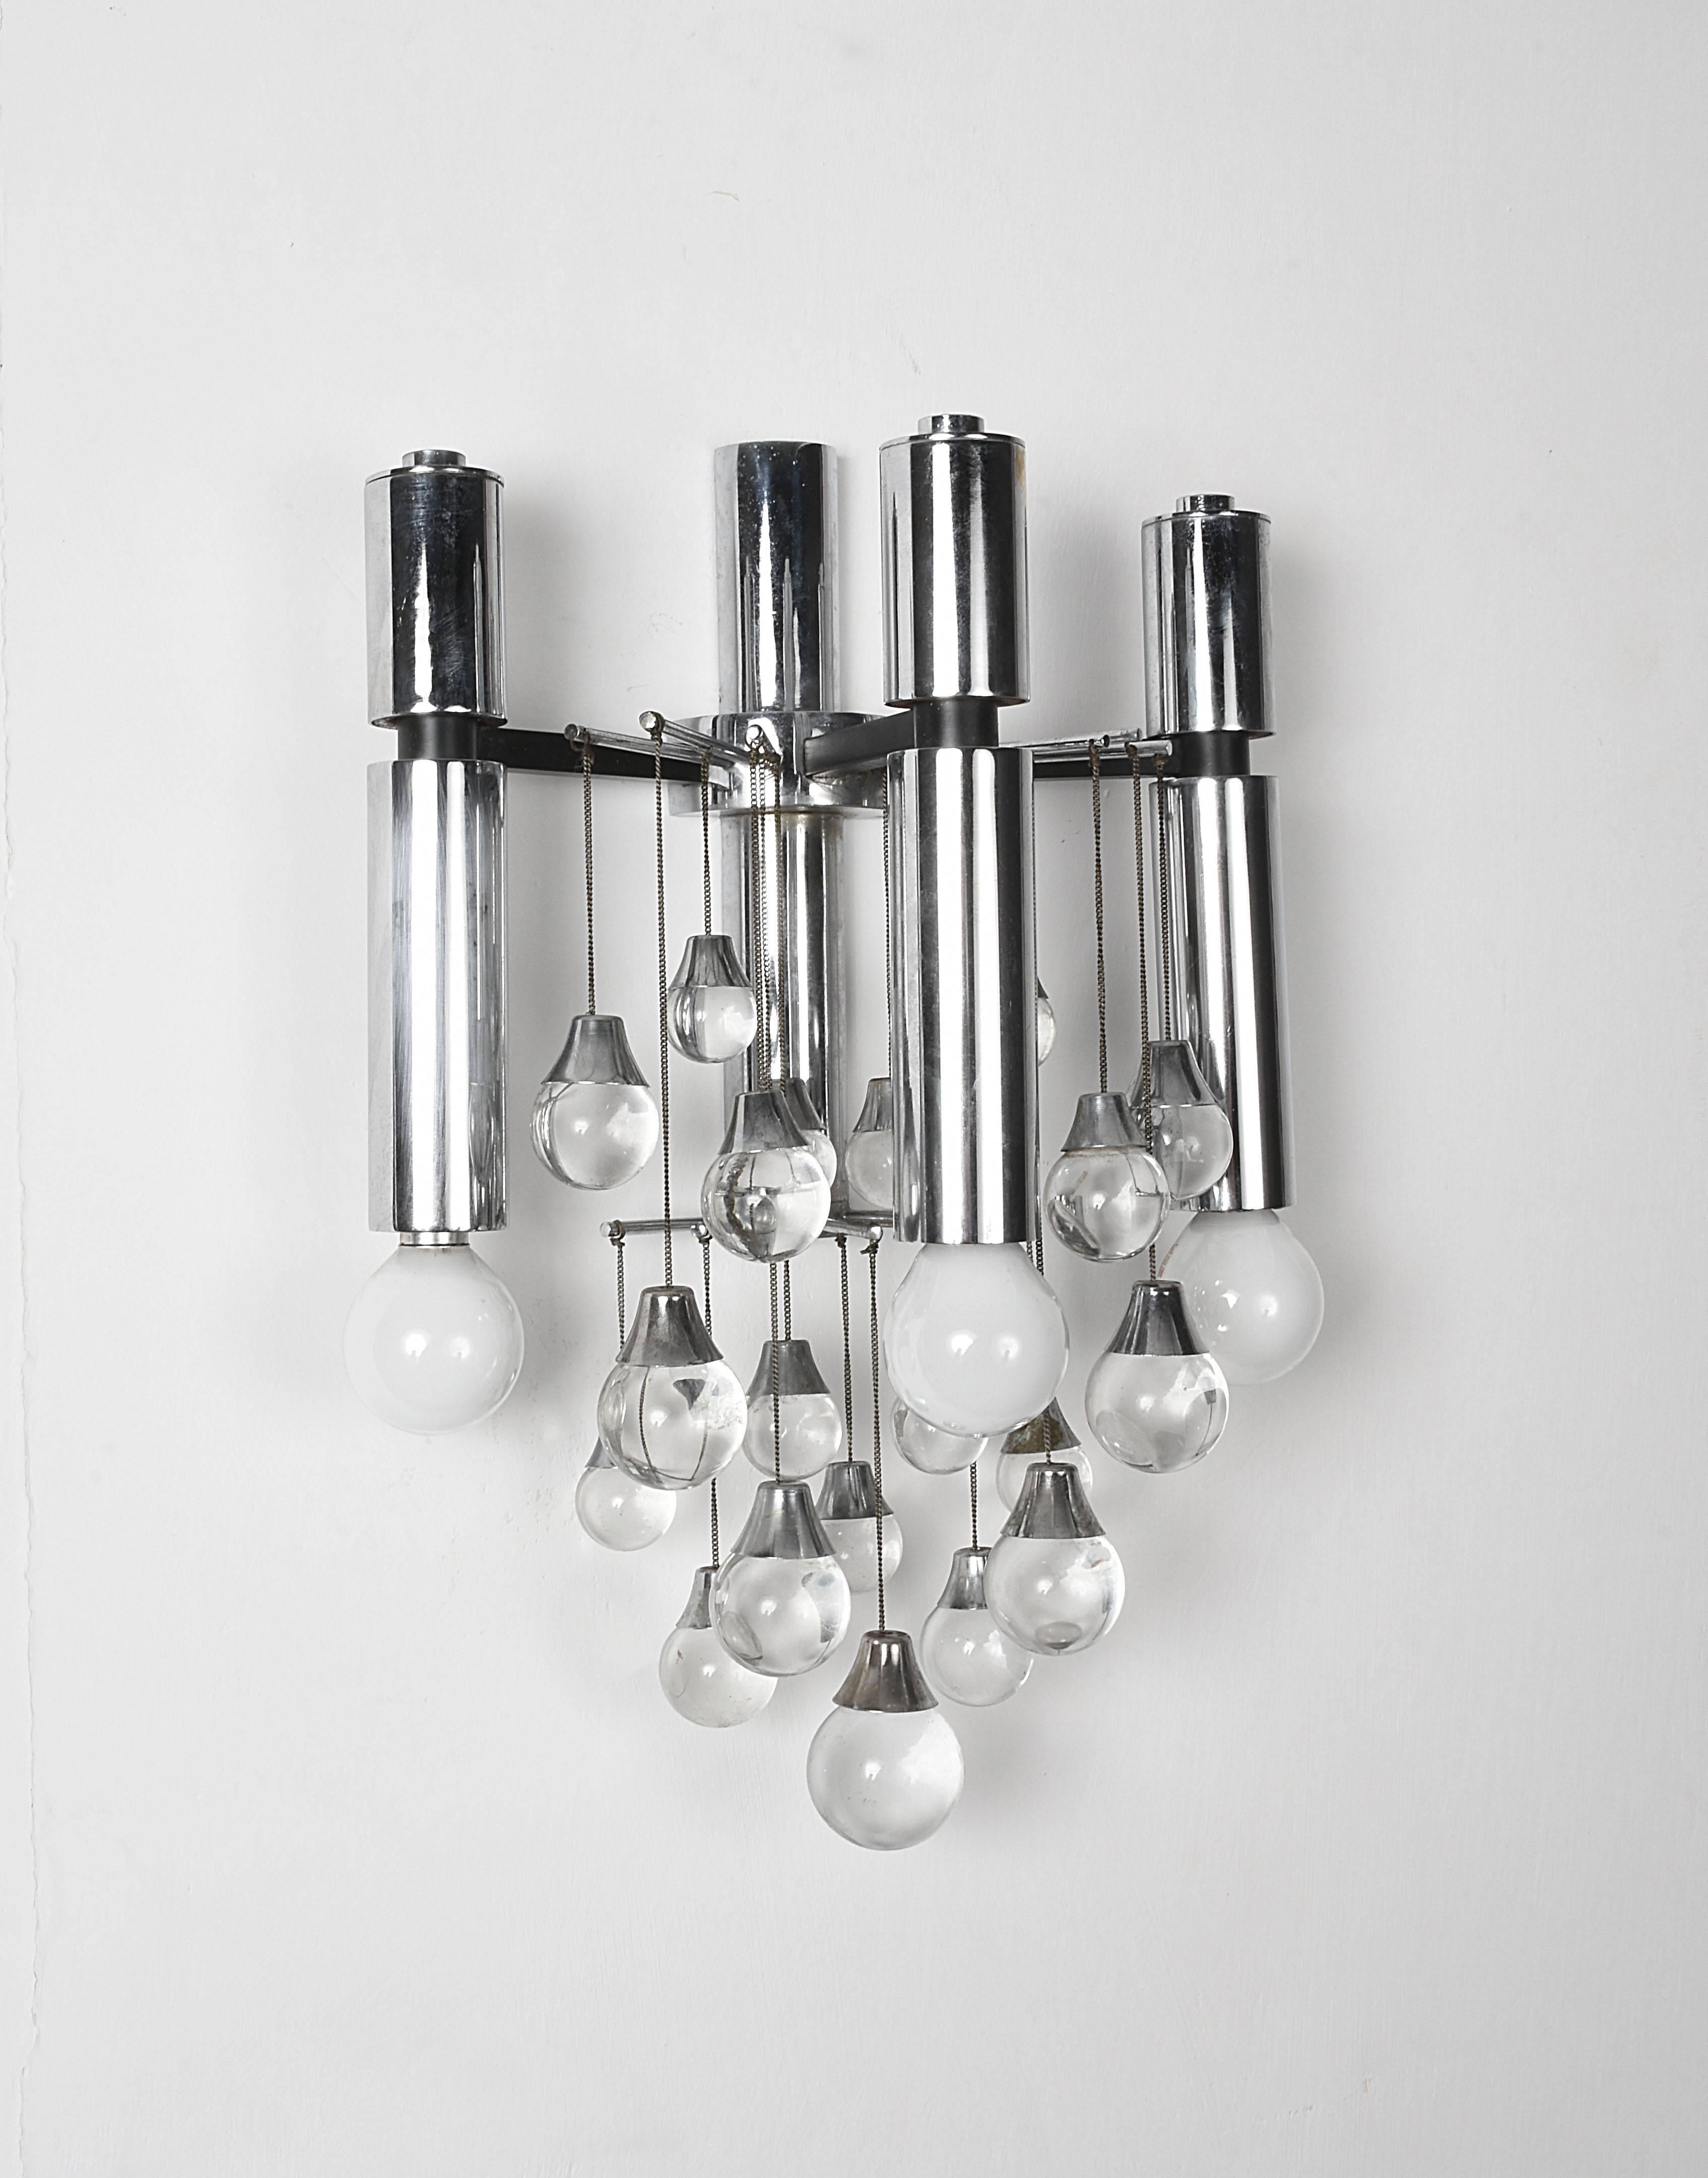 Amazing pair of chrome and glass sconces with three lights. This wonderful piece was produced in Italy during the 1960s.

This piece is elegant and unique as the mix of materials connected to the lines, you can see straight chrome combined with